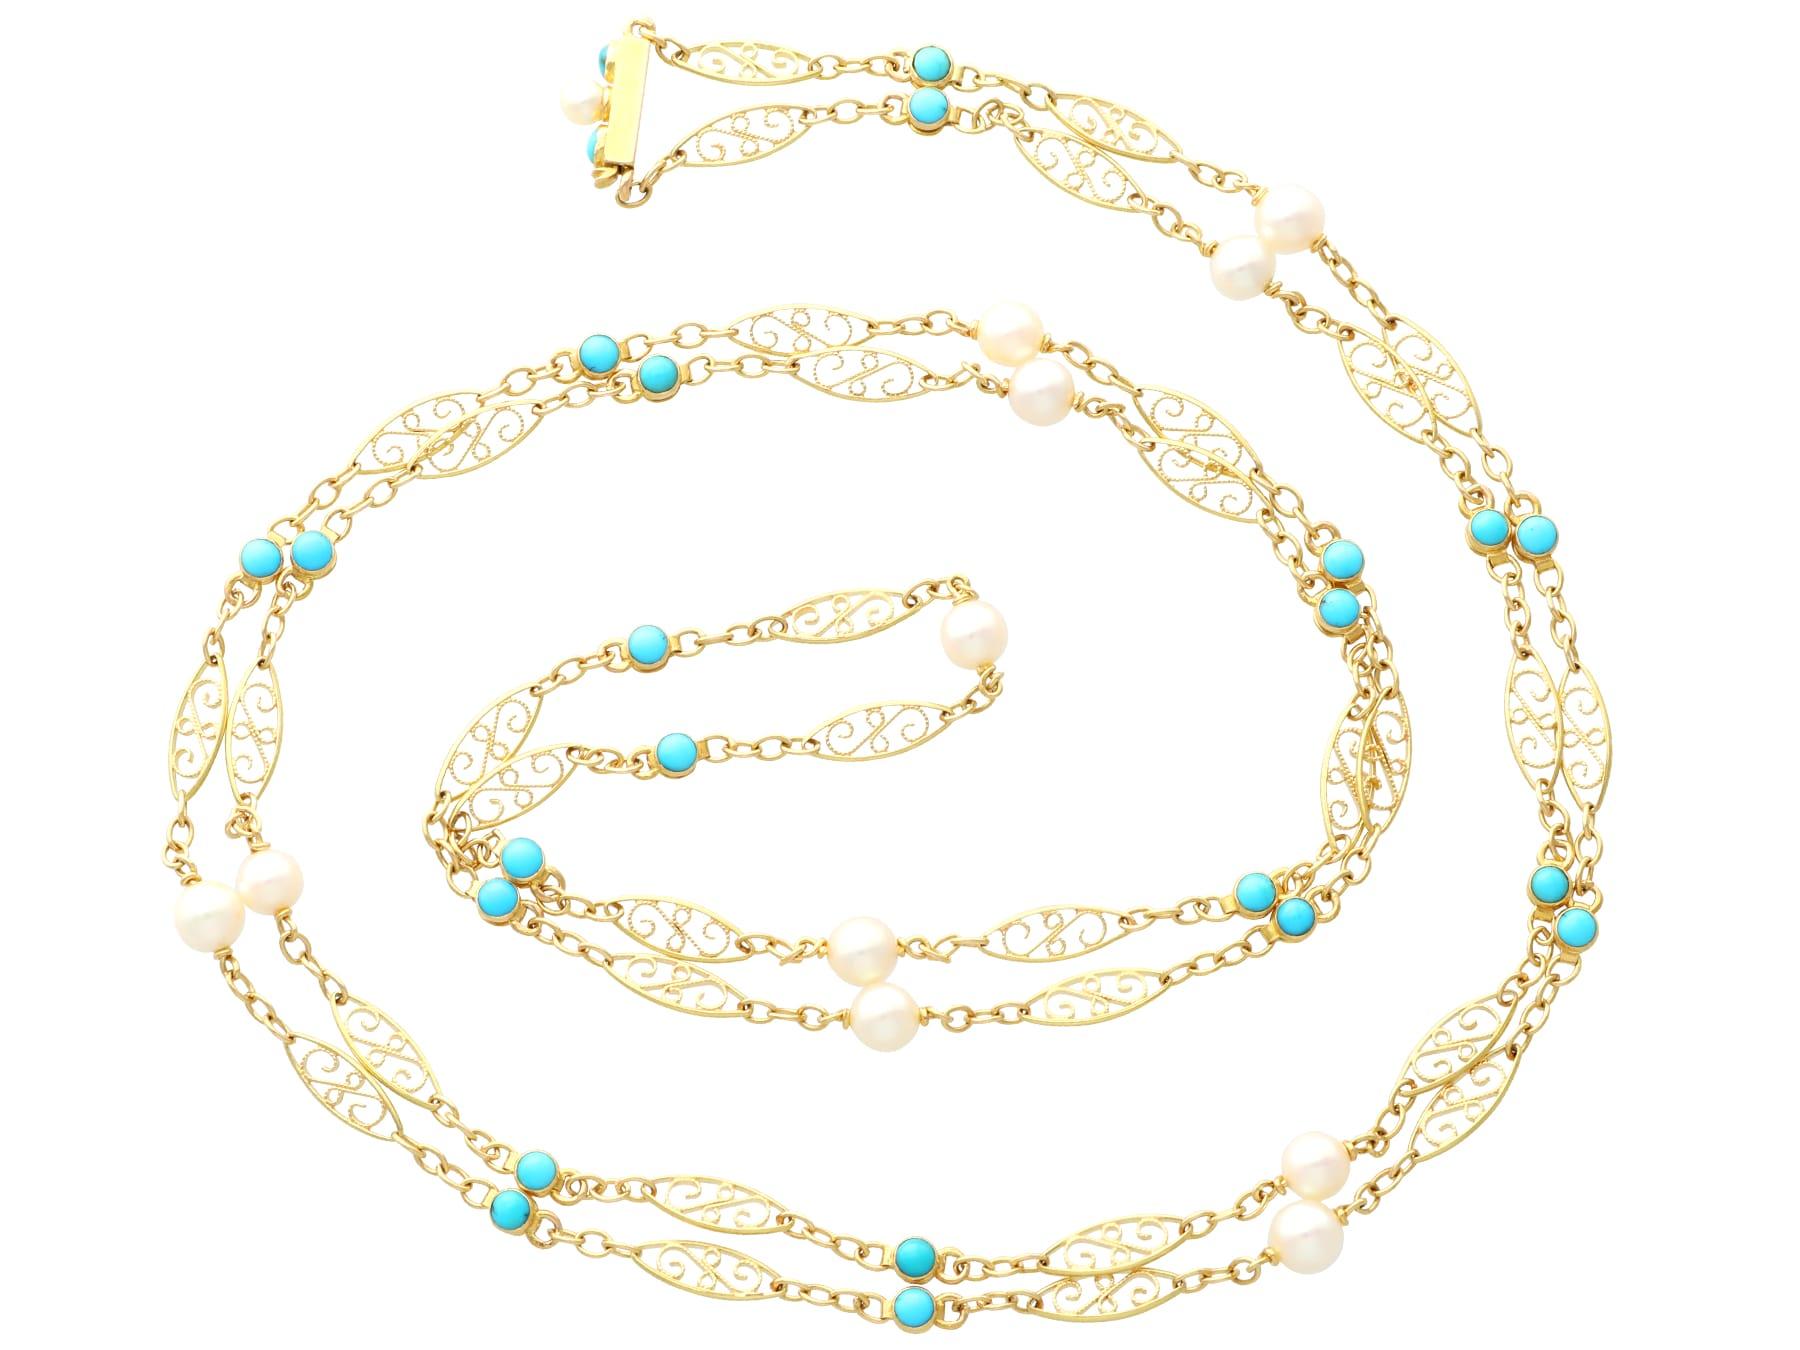 Bead Vintage 3.12 Carat Turquoise and Cultured Pearl 18k Yellow Gold Longuard Chain For Sale